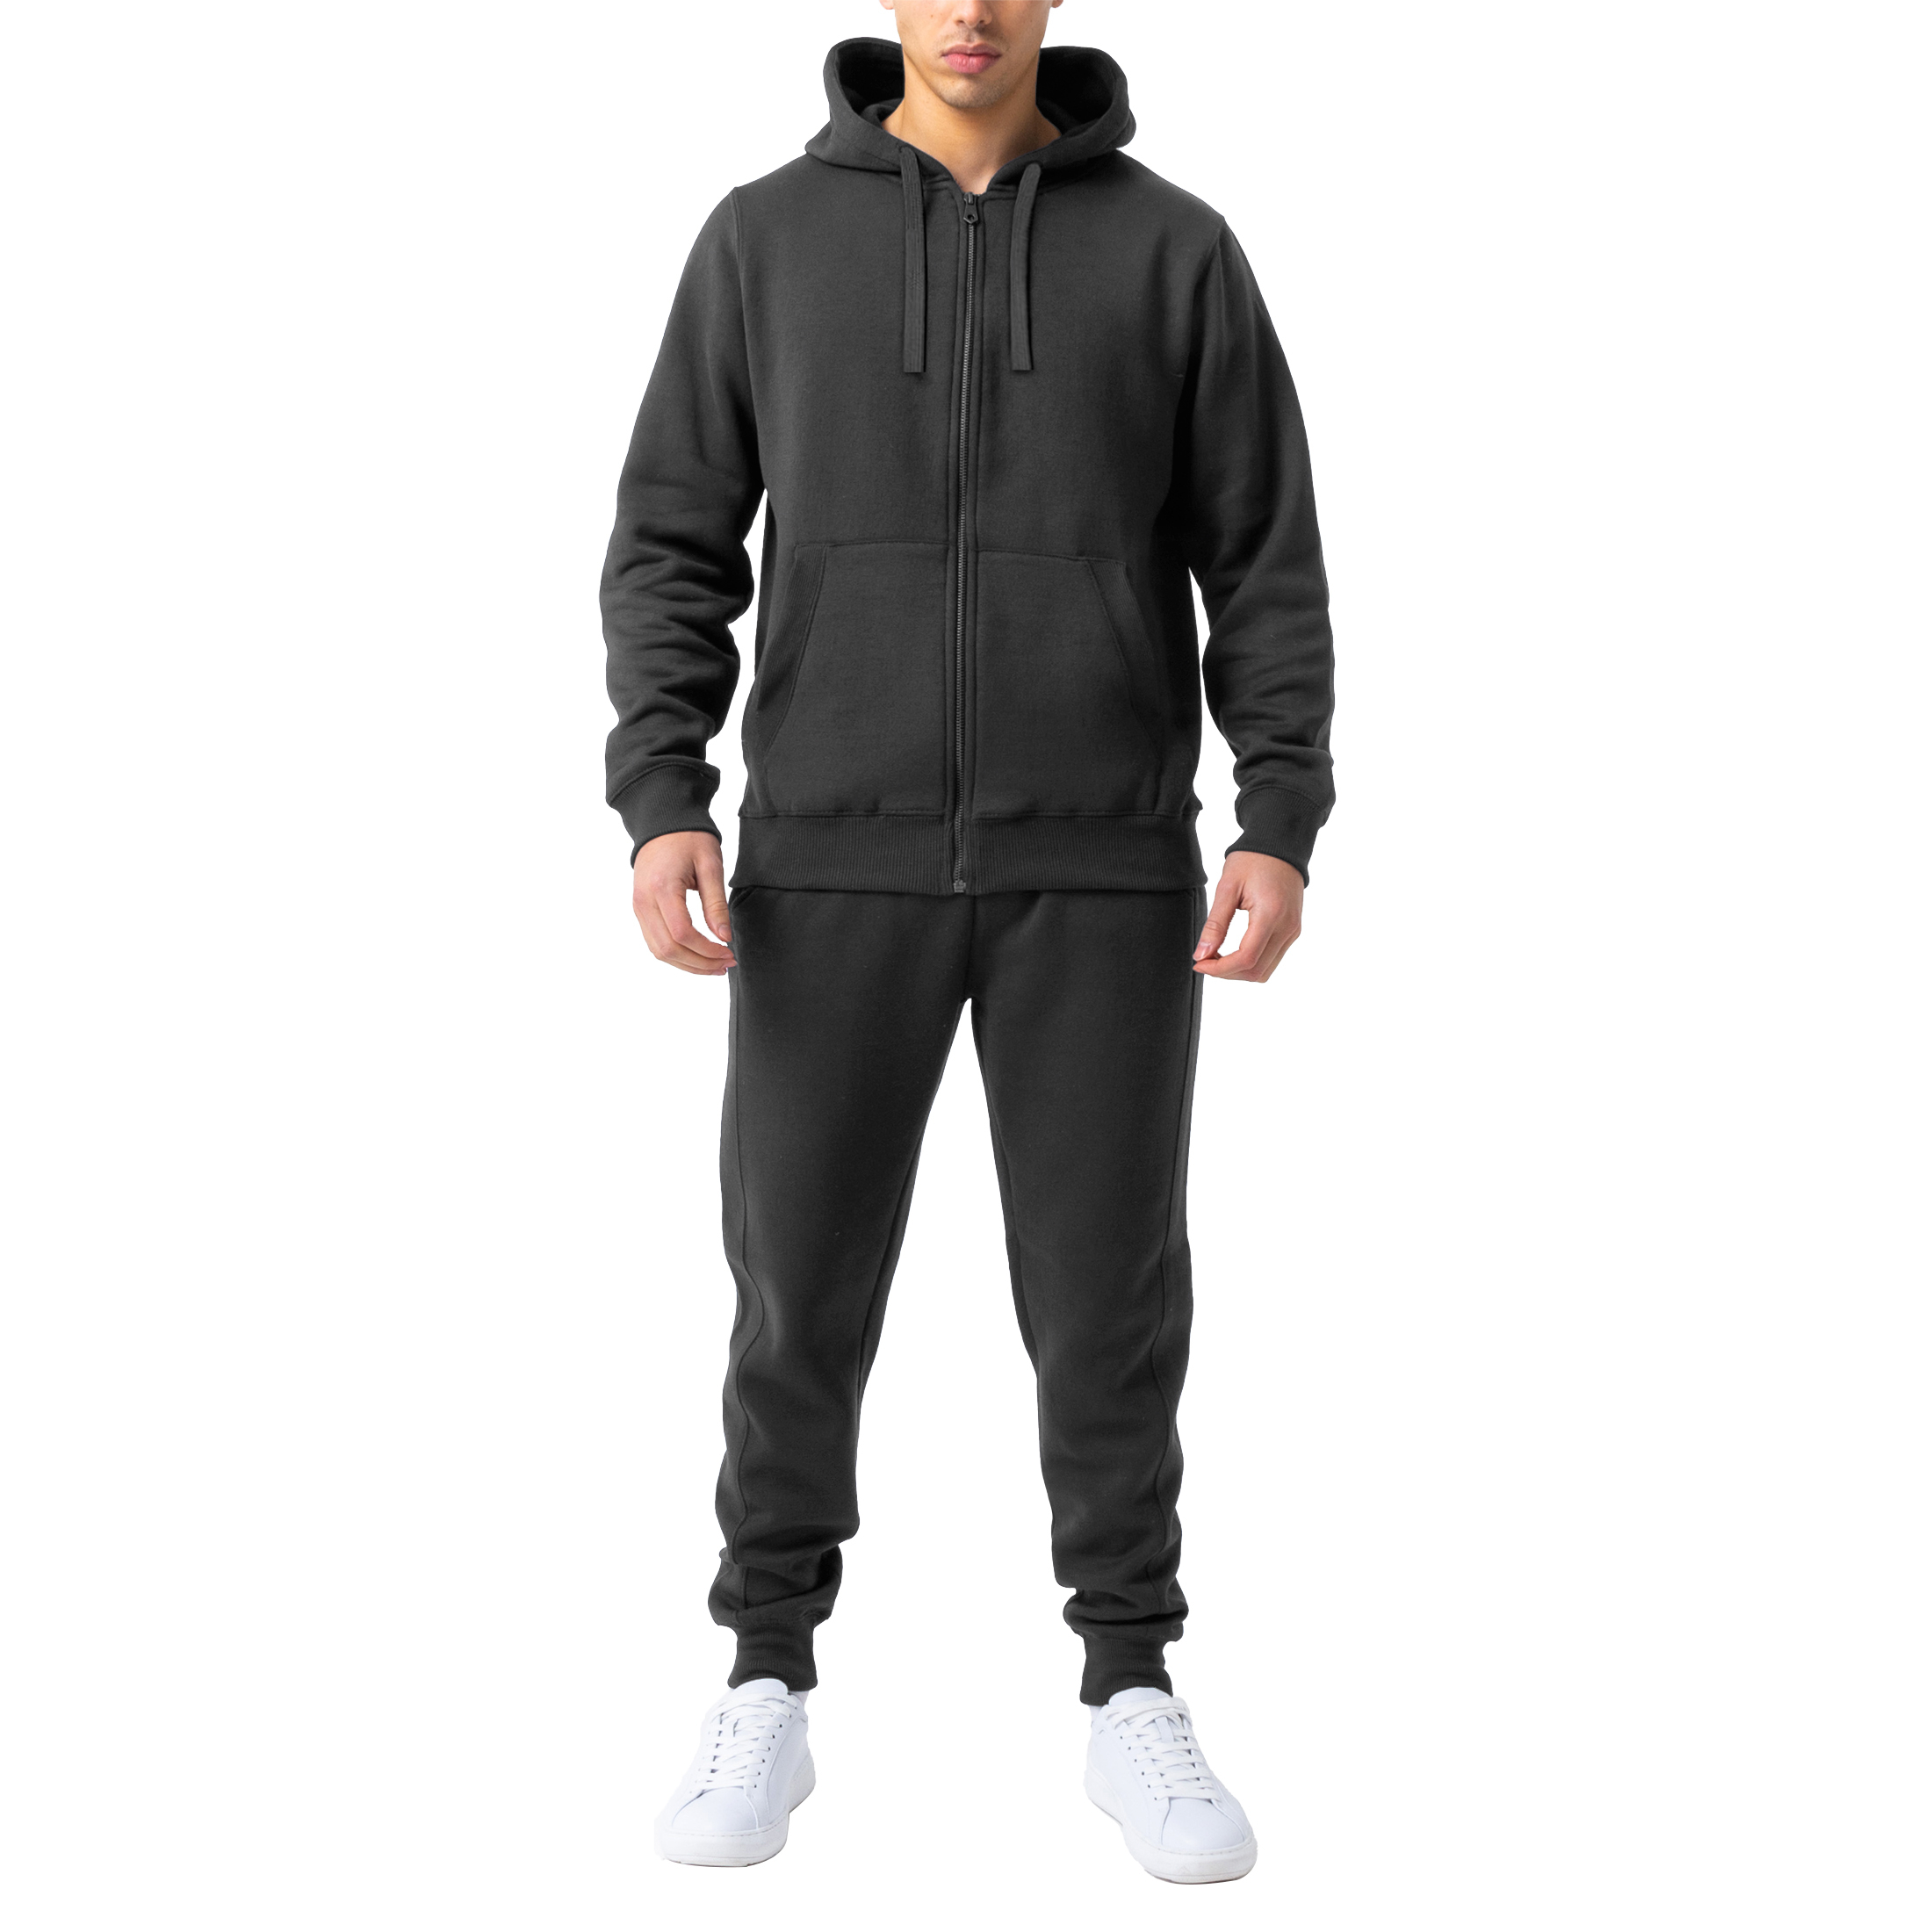 Men's Casual Jogging Athletic Active Full Zip Up Tracksuit - Charcoal, Small